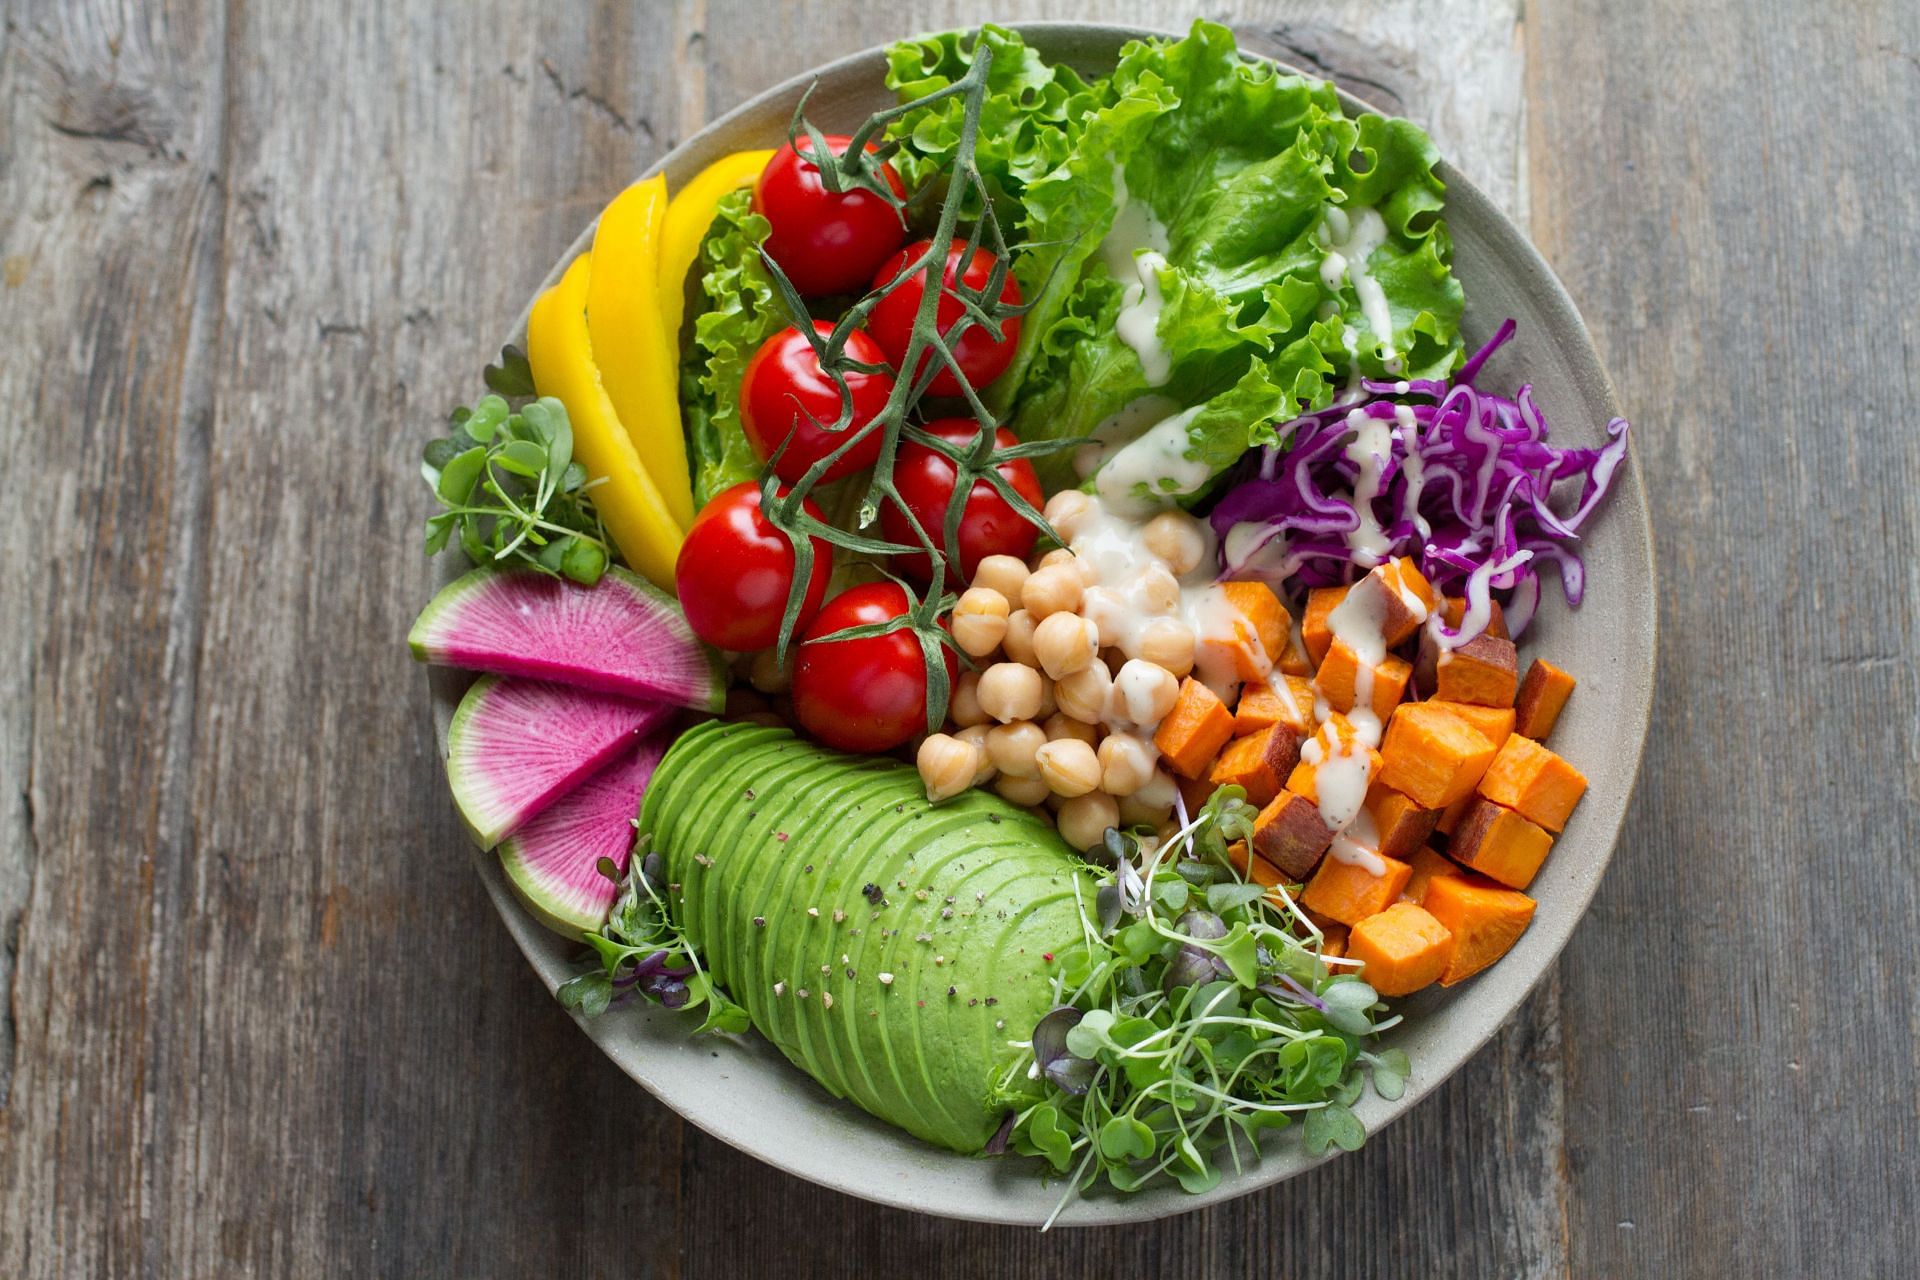 Fresh whole foods are better for overall health (Image via Unsplash/Anna Pelzer)